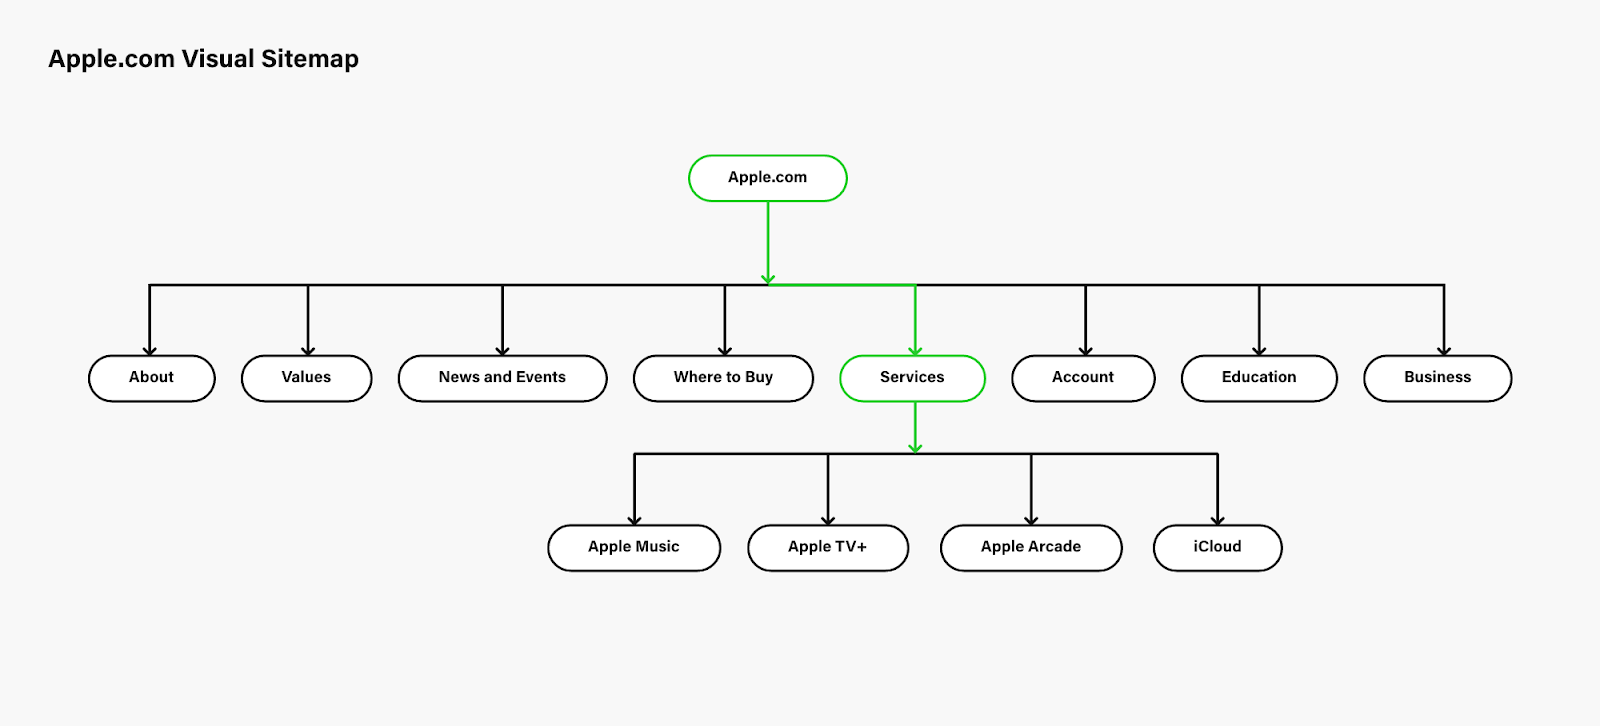 A visual representation of Apple.com's published sitemap highlights the services branch within their website hierarchy.